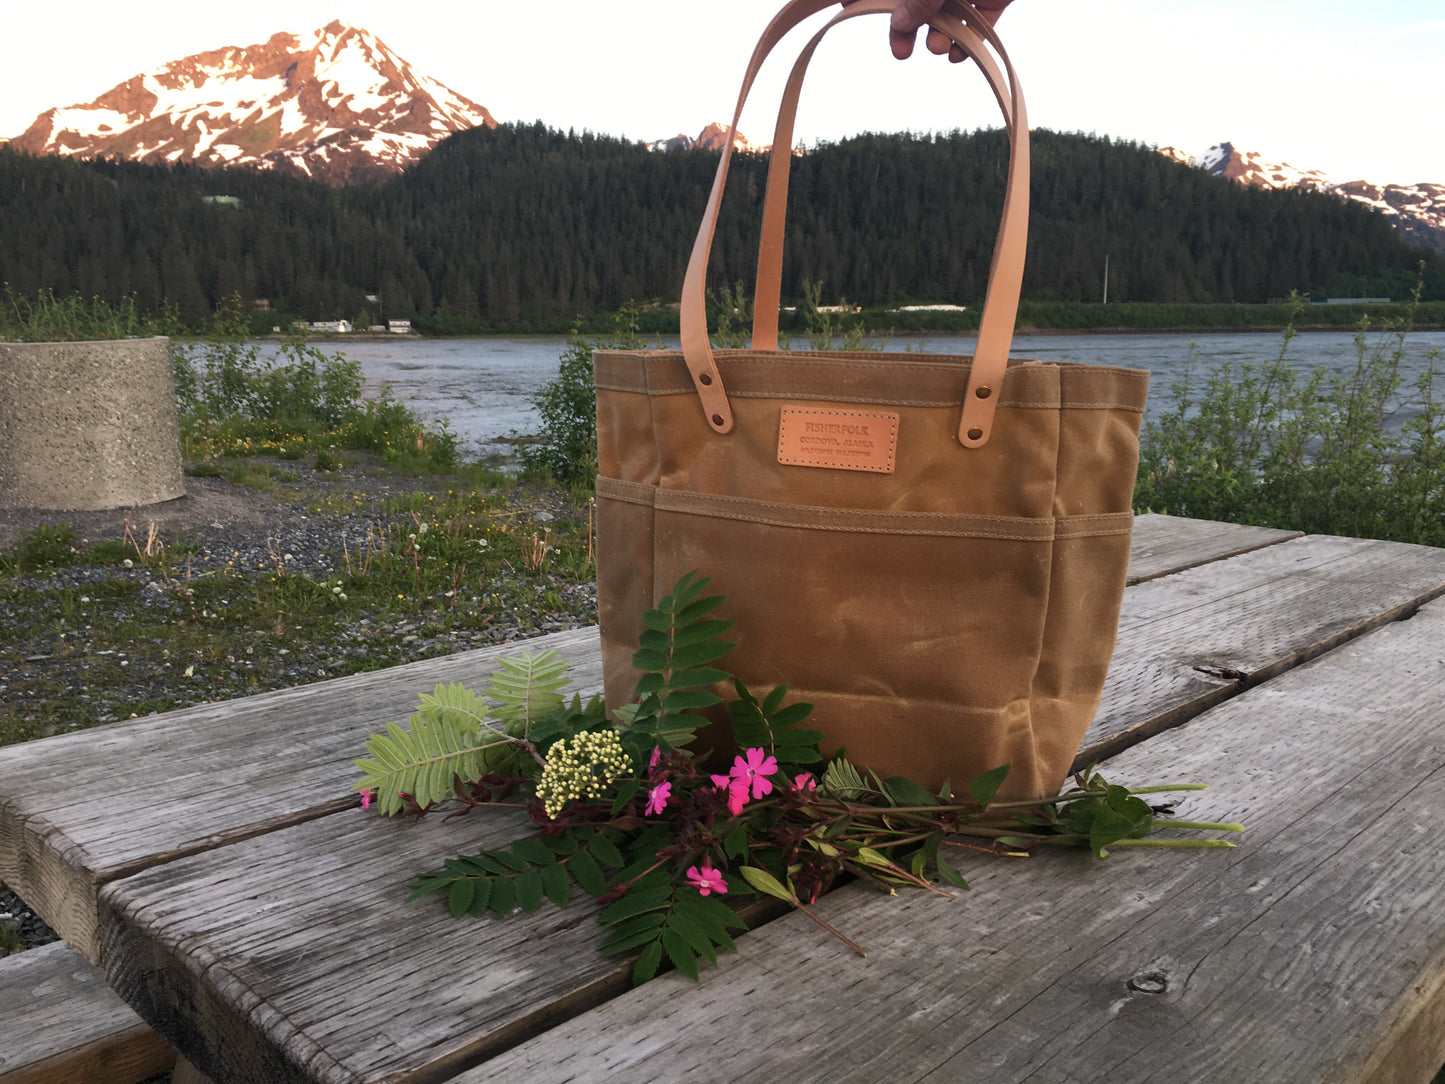 FISHERFOLK Tote is the perfect sturdy tote to carry with you 